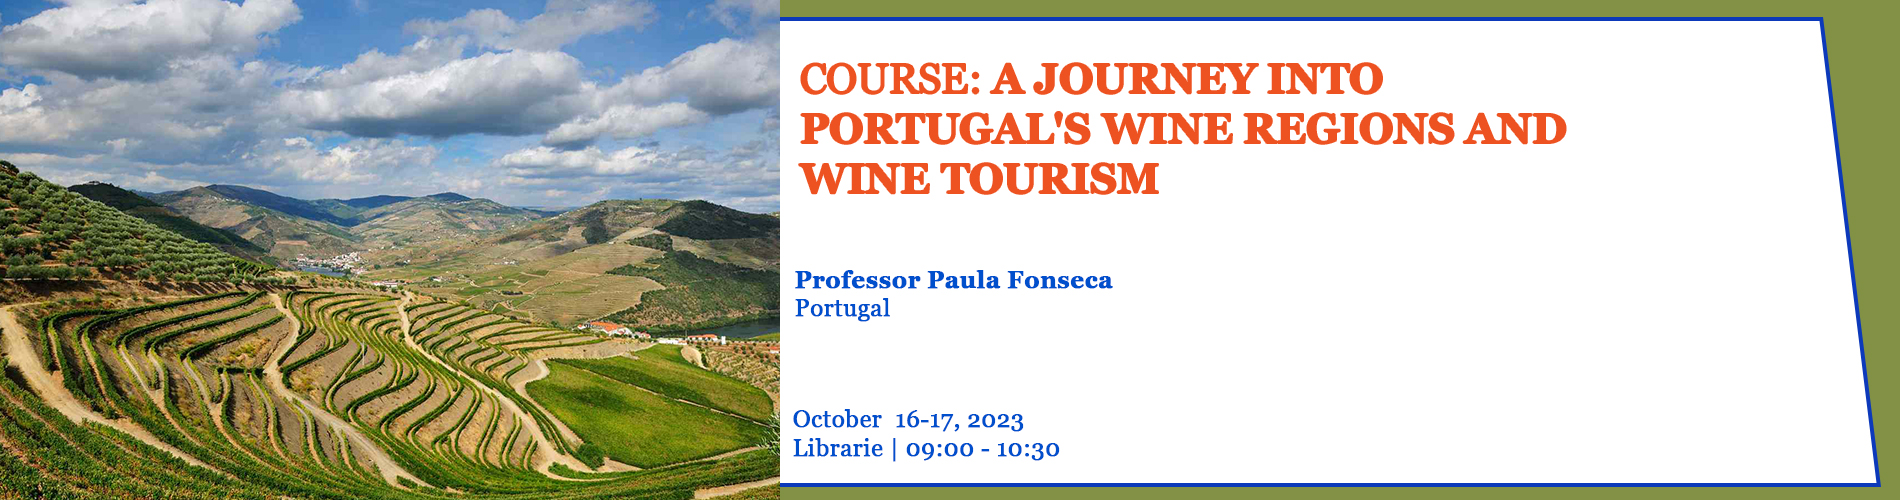 A_Journey_into_Portugal